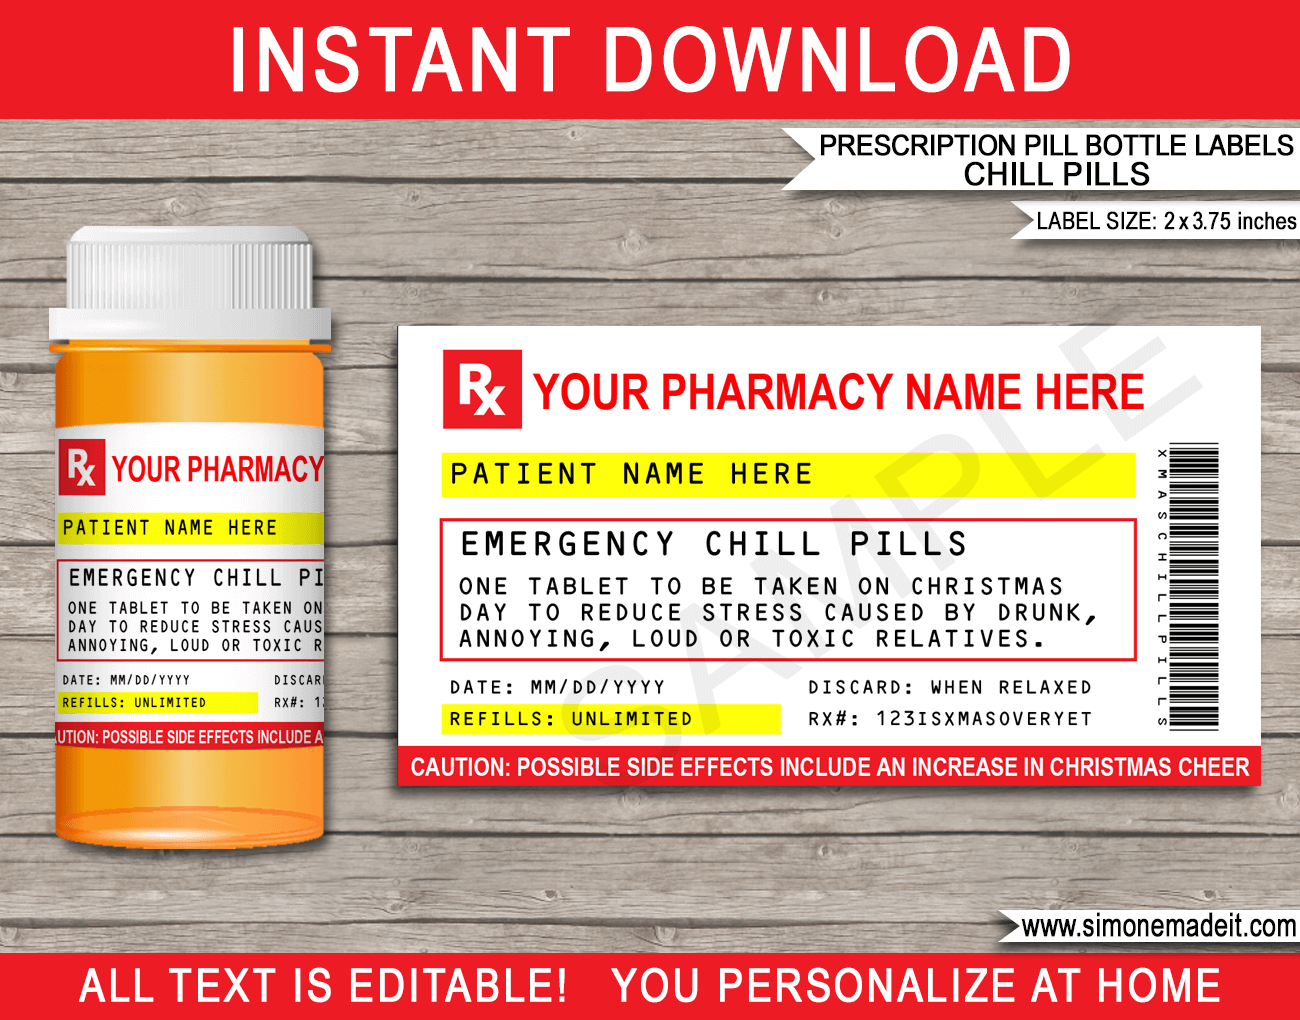 https://www.giftsbysimonemadeit.com/wp-content/uploads/2019/10/Christmas-Prescription-Chill-Pill-Labels-FOR-VIALS.png